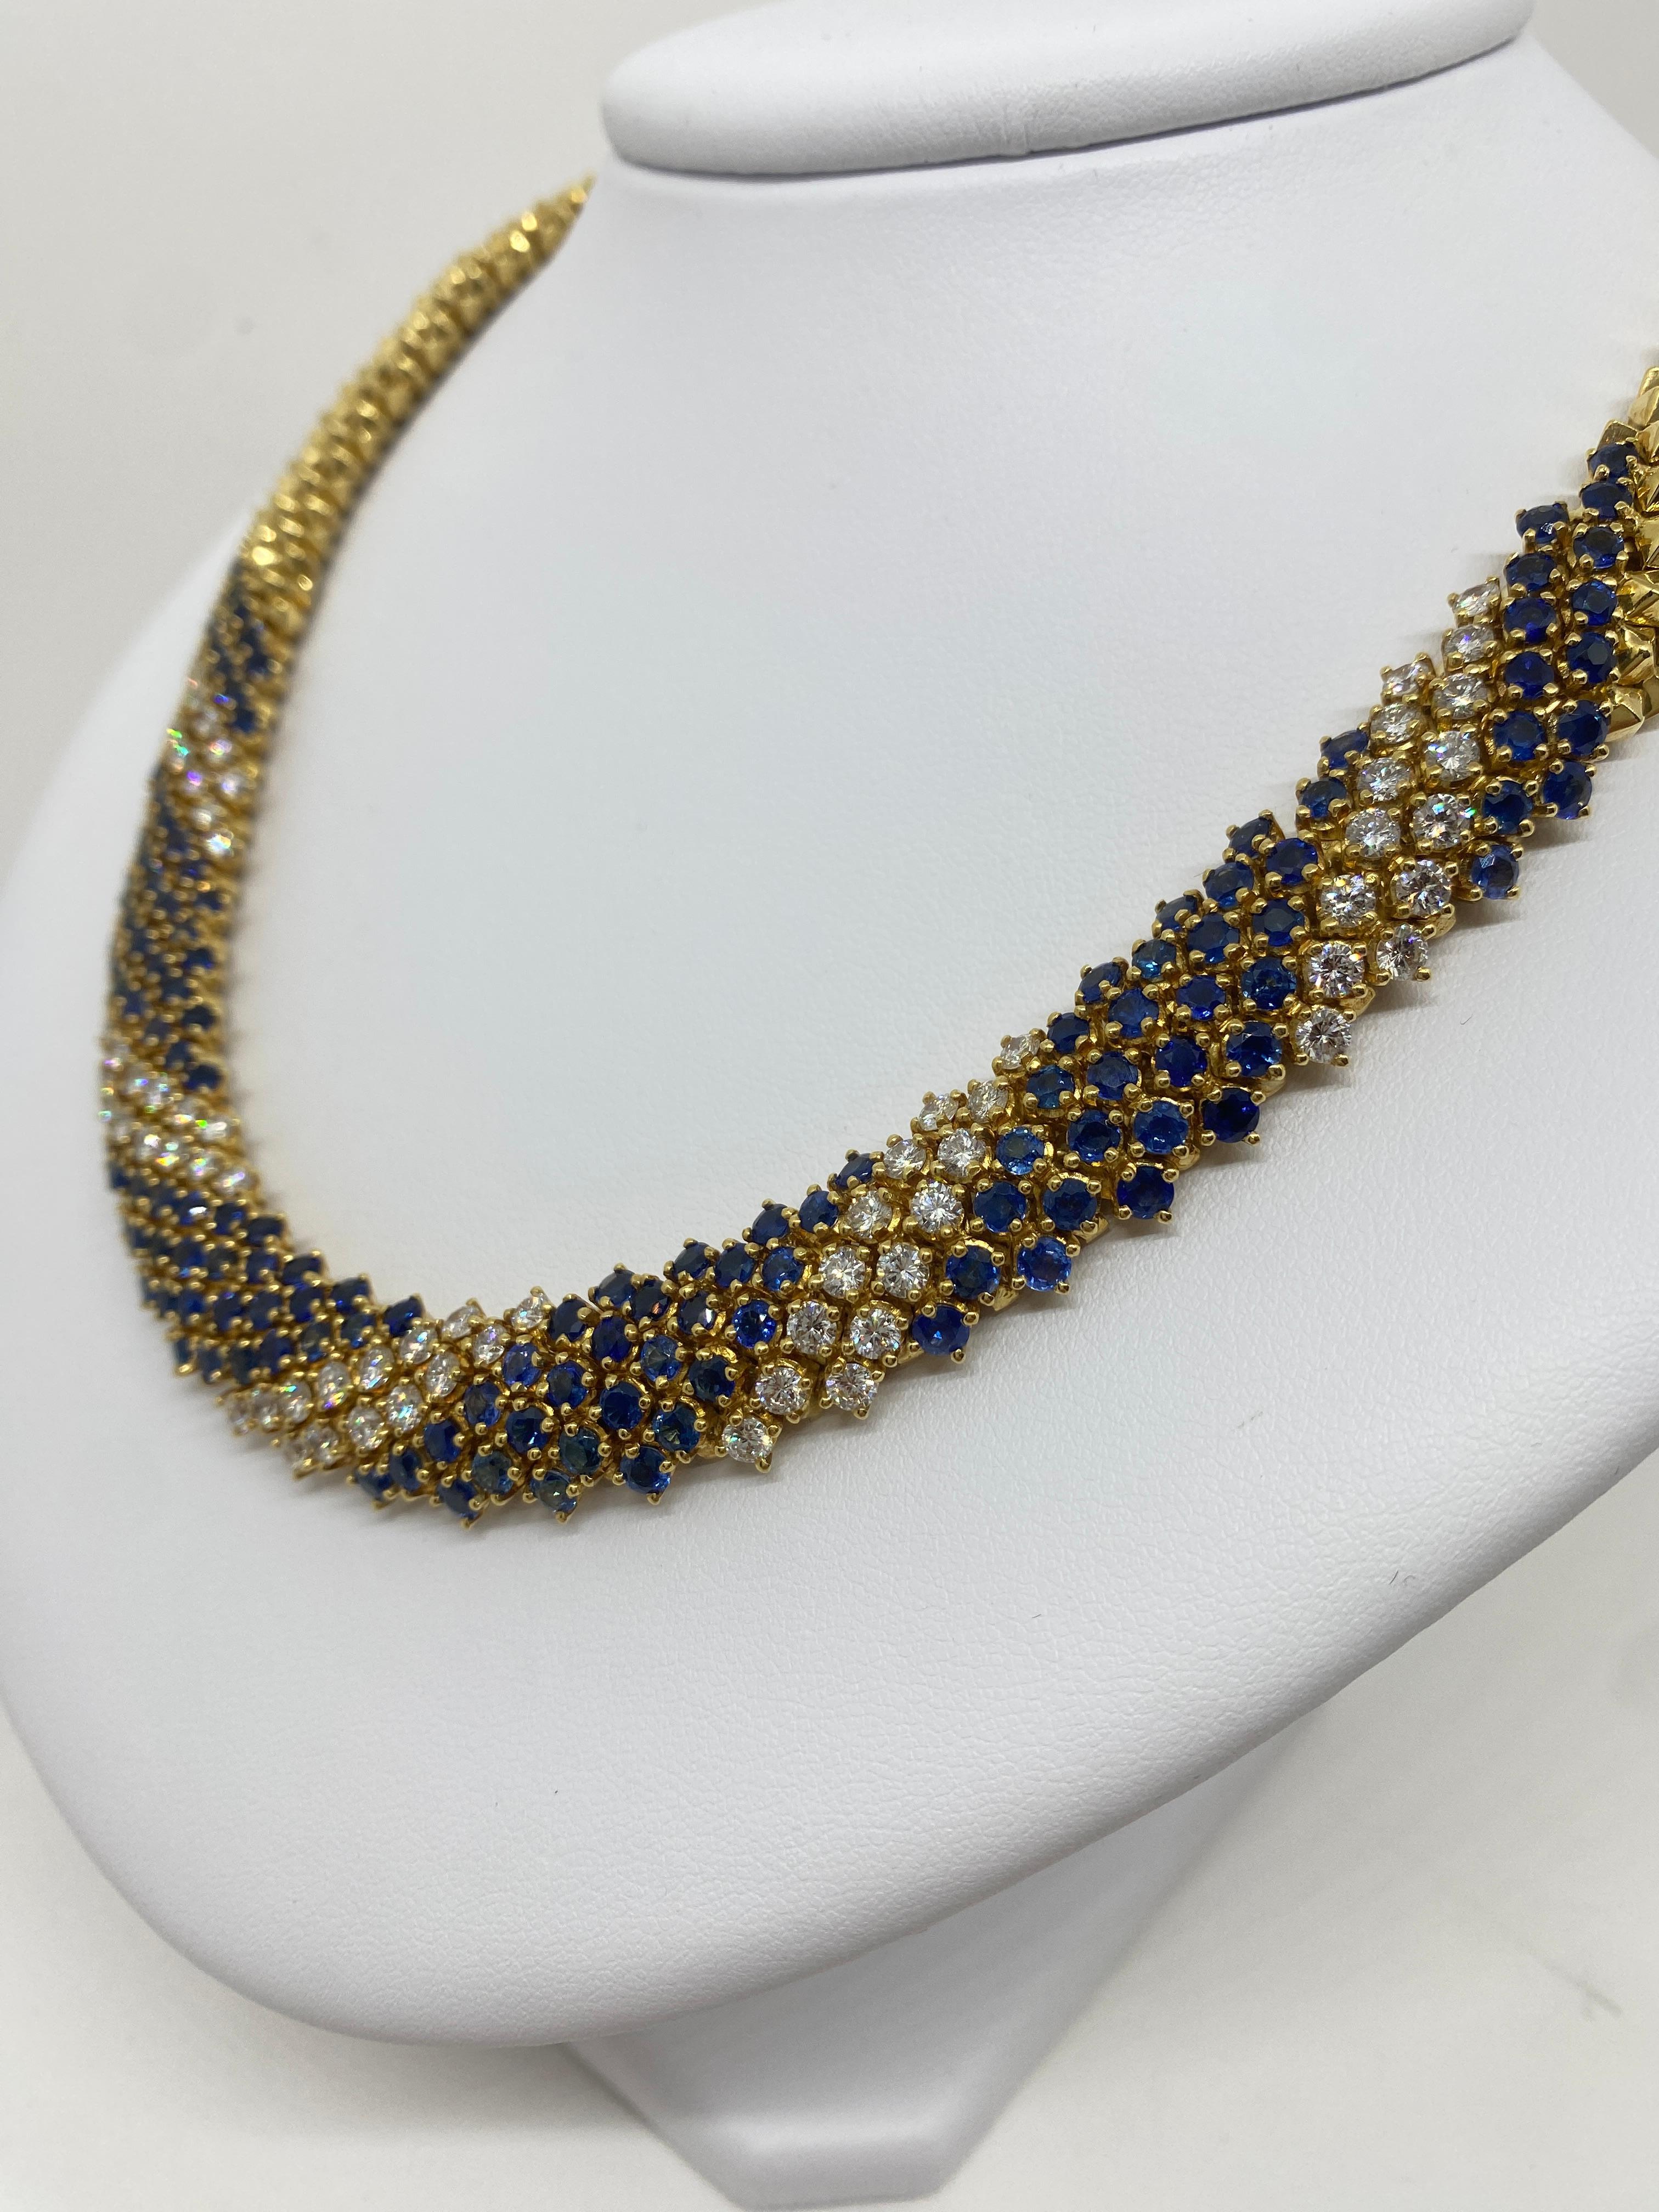 Unique Snake 18kt Yellow Gold Necklace 23 Ct Blue Sapphires 7.42 White Diamonds For Sale 1